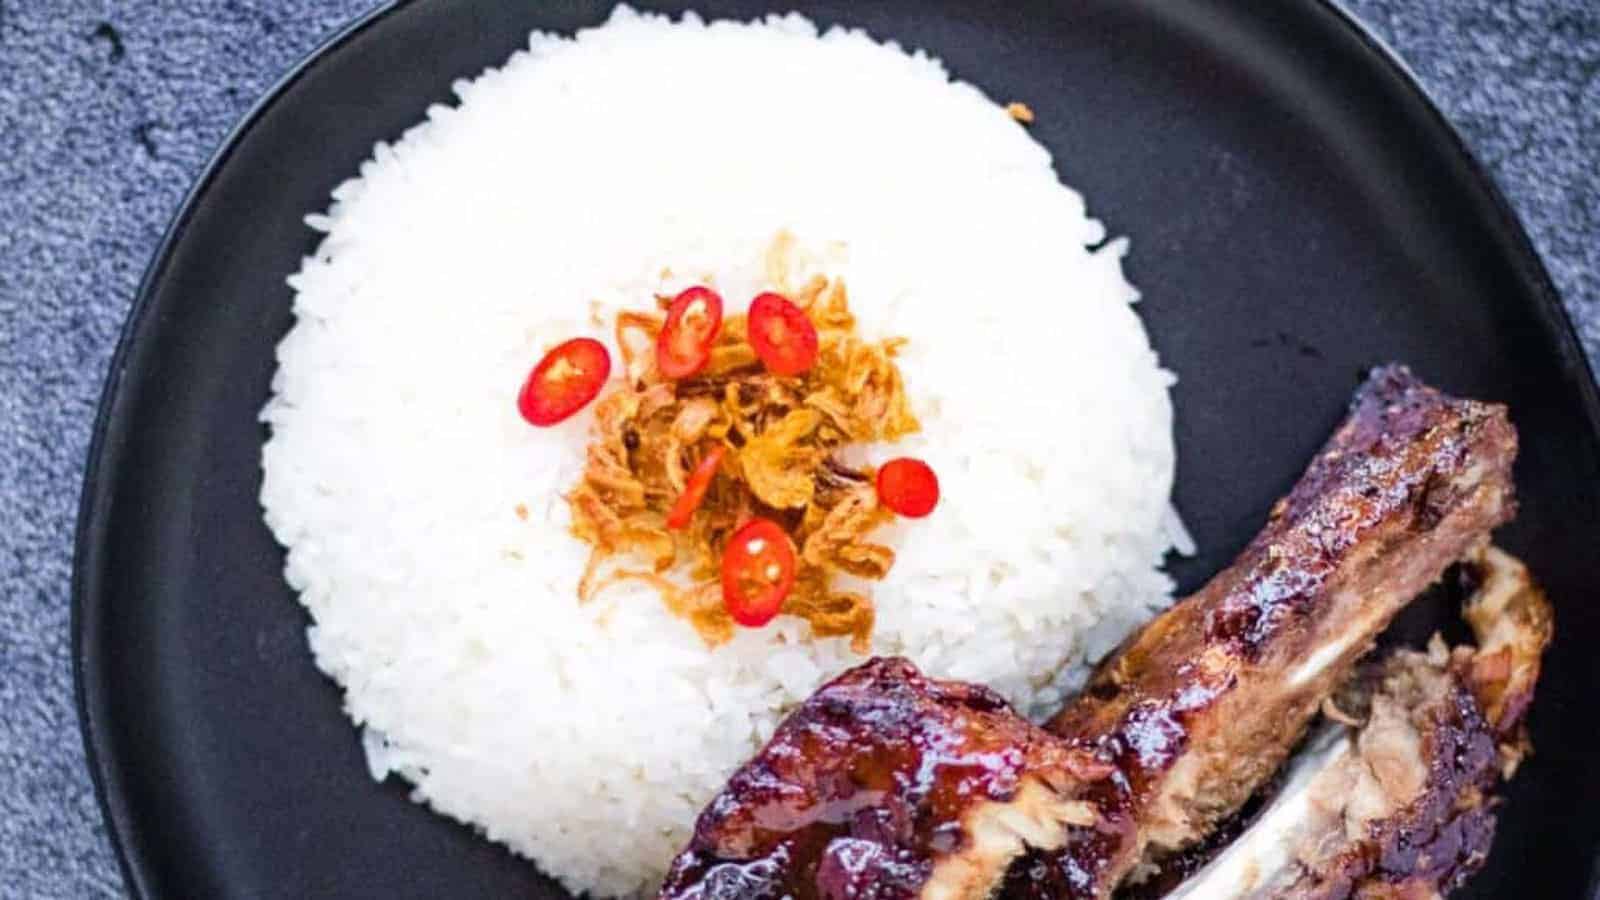 A mound of coconut rice on a black plate with ribs on the side.